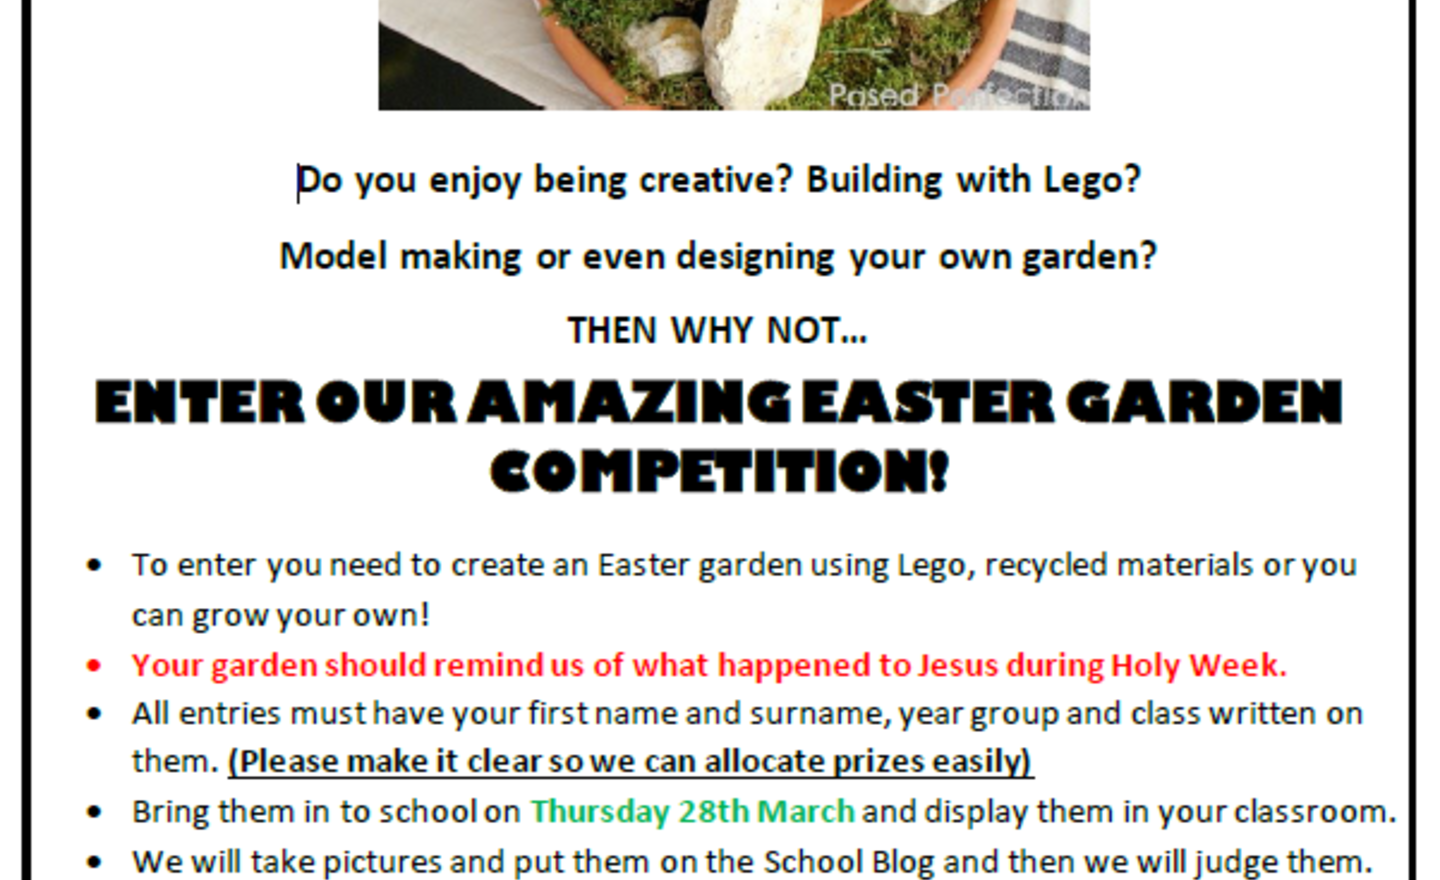 Image of Easter Garden Competition